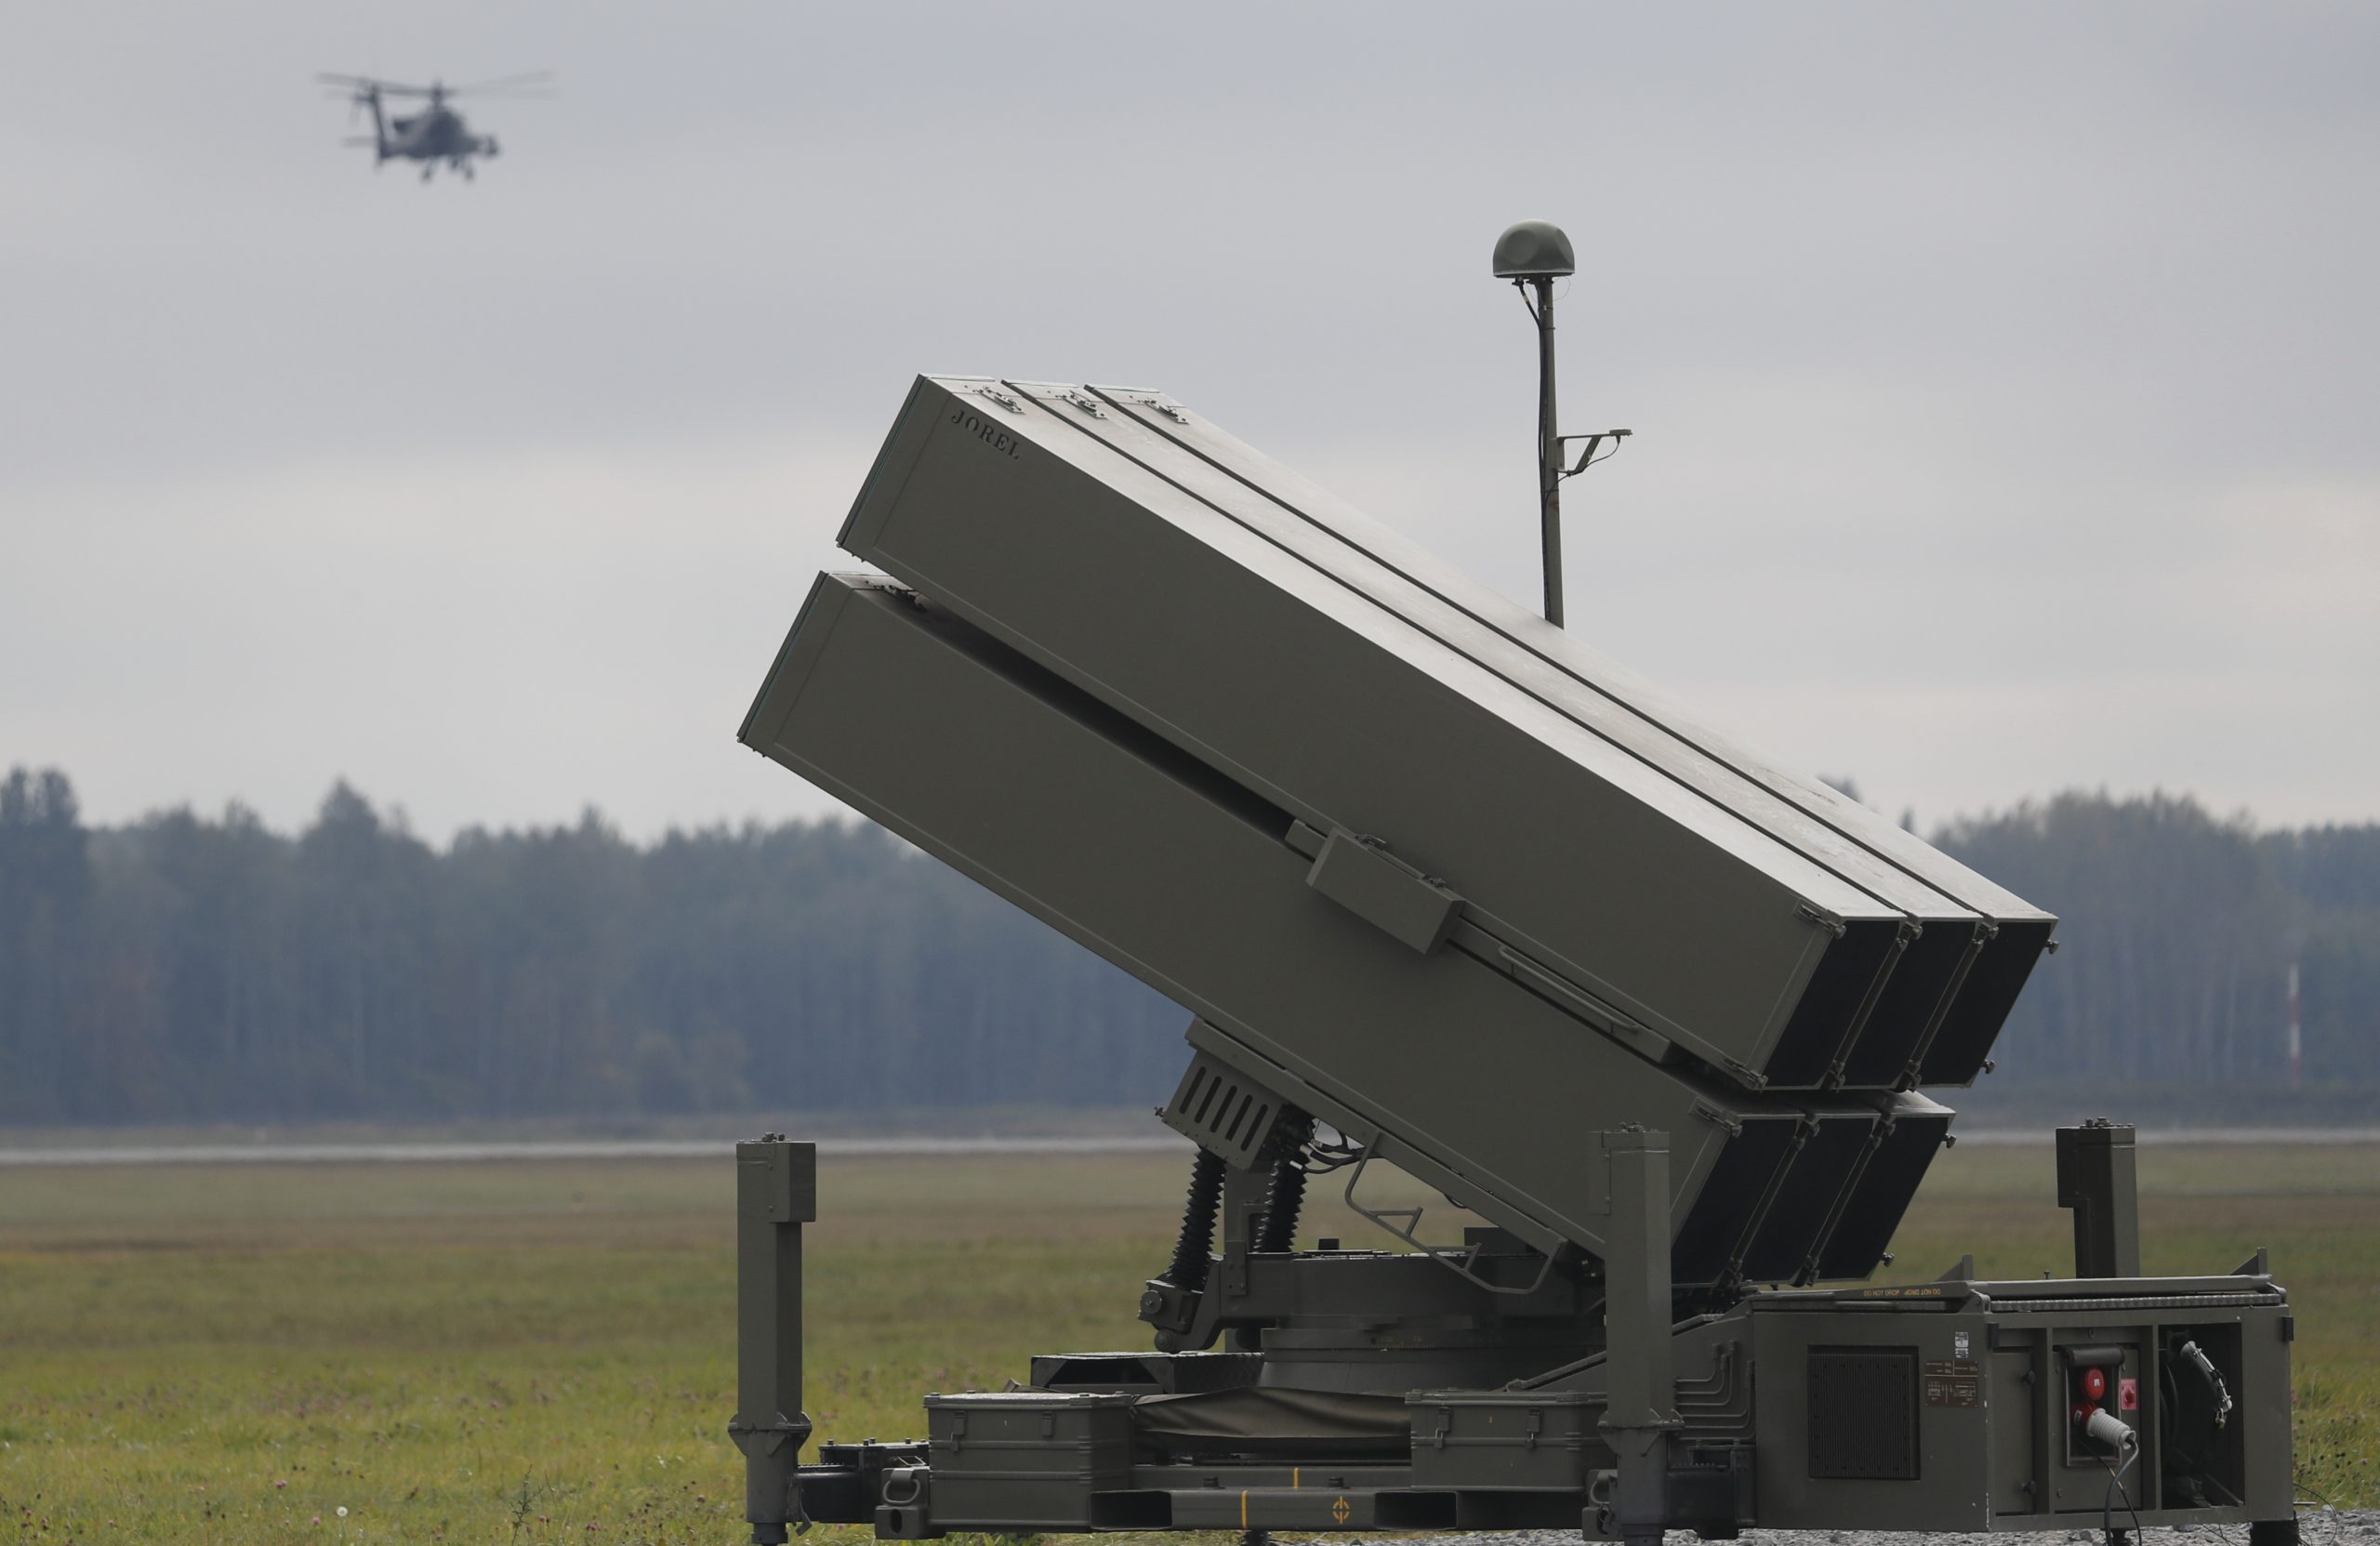 epa10209628 Spanish army air defence systems NASAMS simulates the defence during Ramstein Alloy exercise in Lielvarde Air Base, Latvia, 27 September 2022. NATO said Hungary, Germany, Czech Republic, Italy, Turkey, the United Kingdom, Estonia, Latvia and Lithuania, as well as partner Finland, will conduct the two-day third Ramstein Alloy exercise in 2022. During the exercise participating air forces flew quick reaction alert drills including Communication Loss, Slow Mover Intercept, Dissimilar Air Combat Training, Combat Search and Rescue, Close Air Support and Air-to-Air Refuelling scenarios. One special focus was on the integration of a Spanish Ground Based Air Defense Task Force into the activities. Spanish NASAMS air defence systems simulated the defence of Lielvarde Air Base against aerial attack.  EPA/TOMS KALNINS